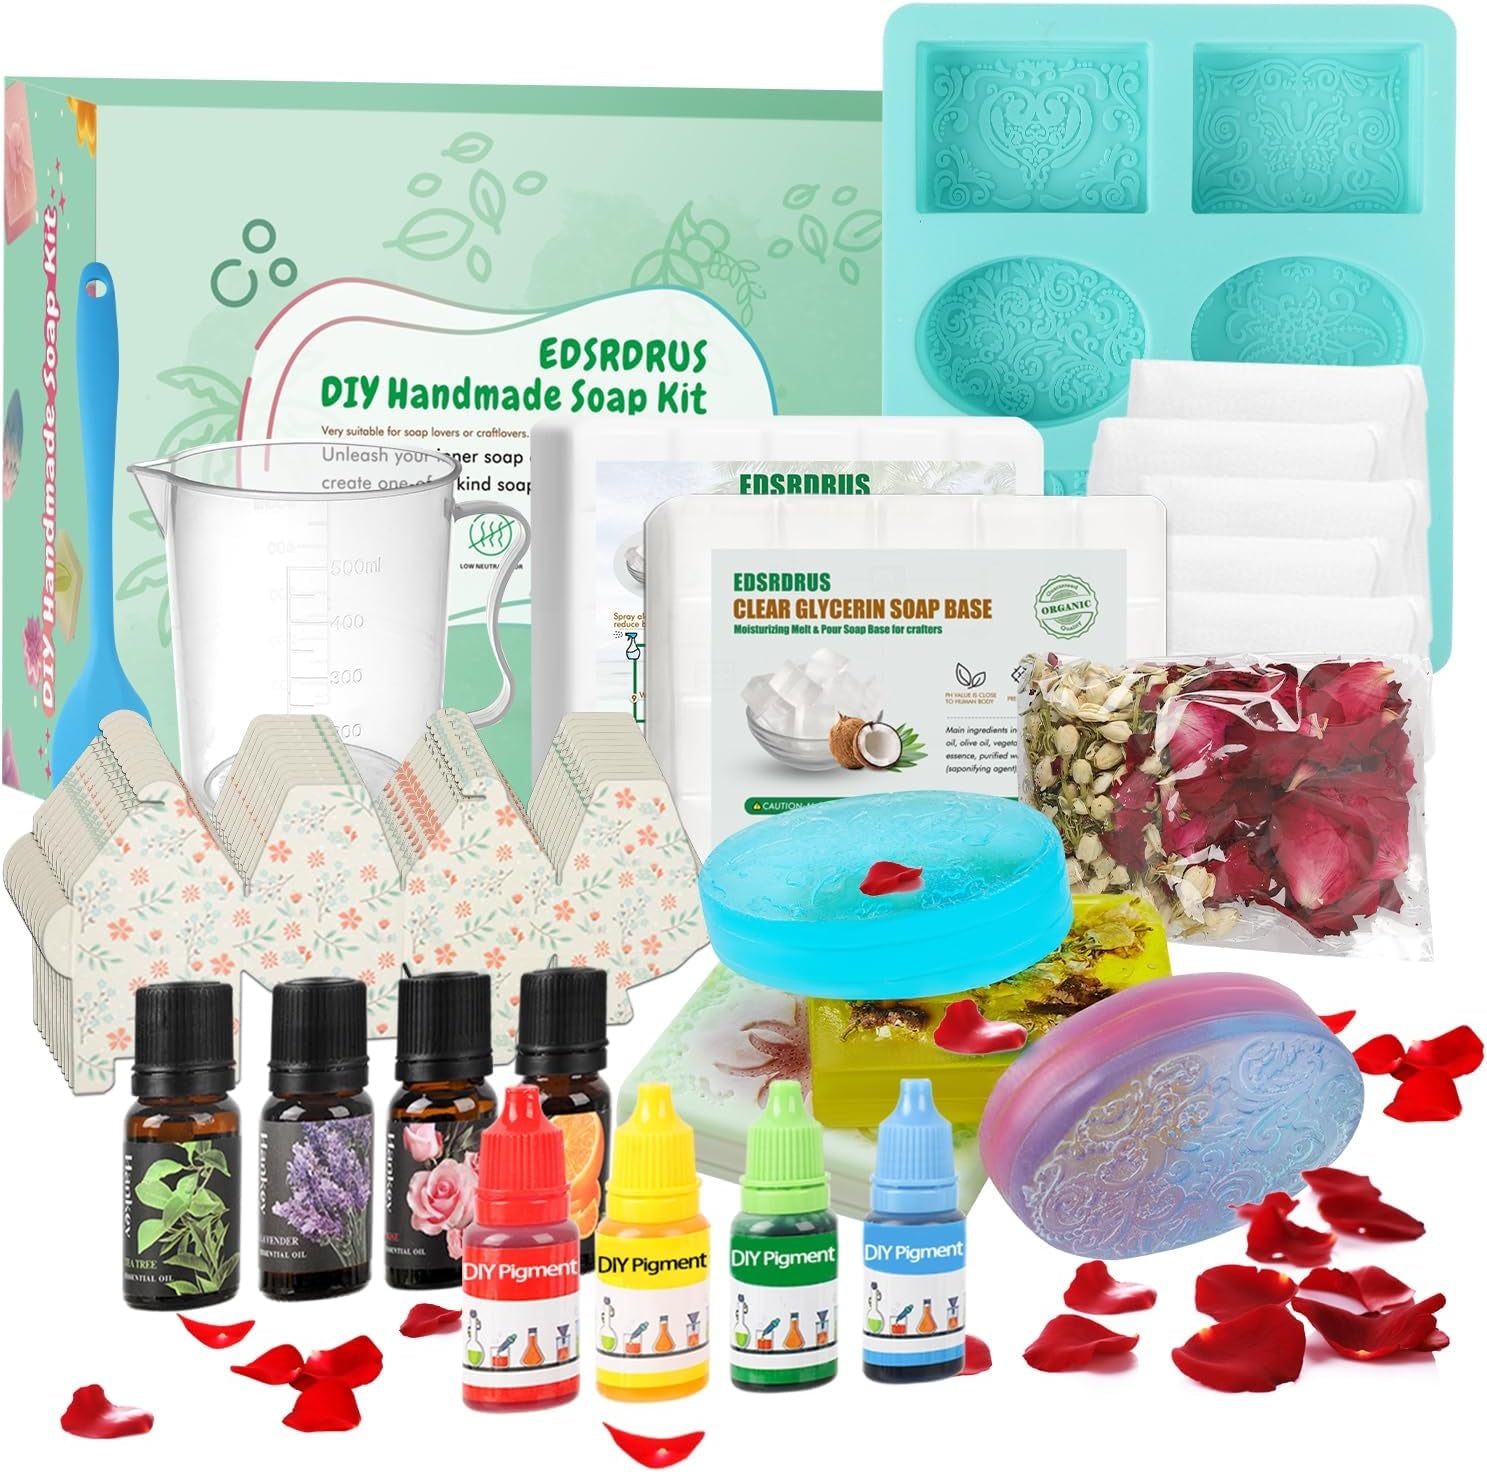 DIY Soap Making Kit Supplies for Beginners – 2Lbs Melt and Pour Soap Base, Flowers, Molds, Essential Oils, Pigments, 10 Gift Boxes & Bags Included!